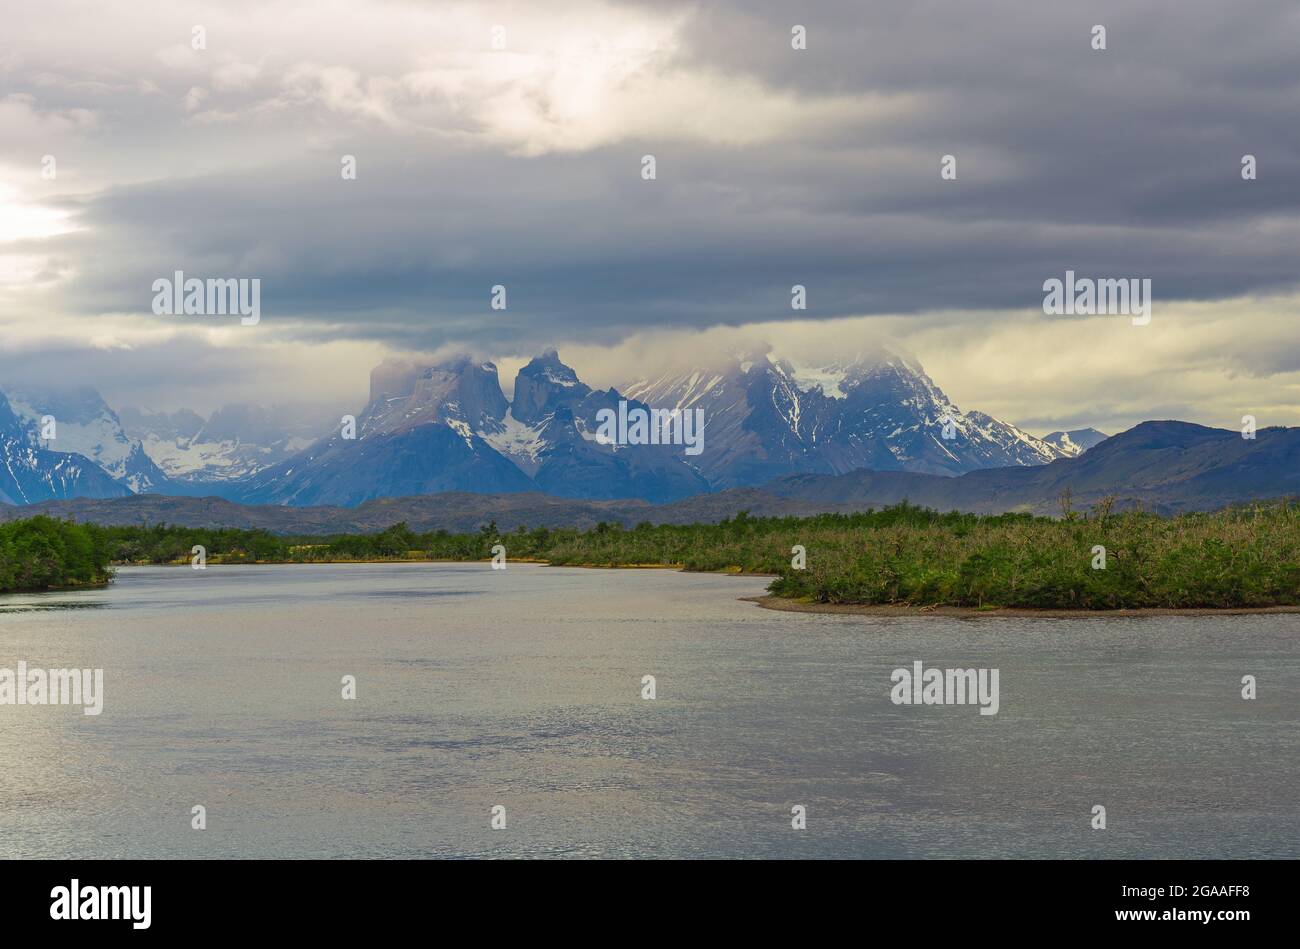 Dramatic clouds and rainy weather above the Cuernos and Torres del Paine Andes peaks in spring, Torres del Paine national park, Patagonia, Chile. Stock Photo